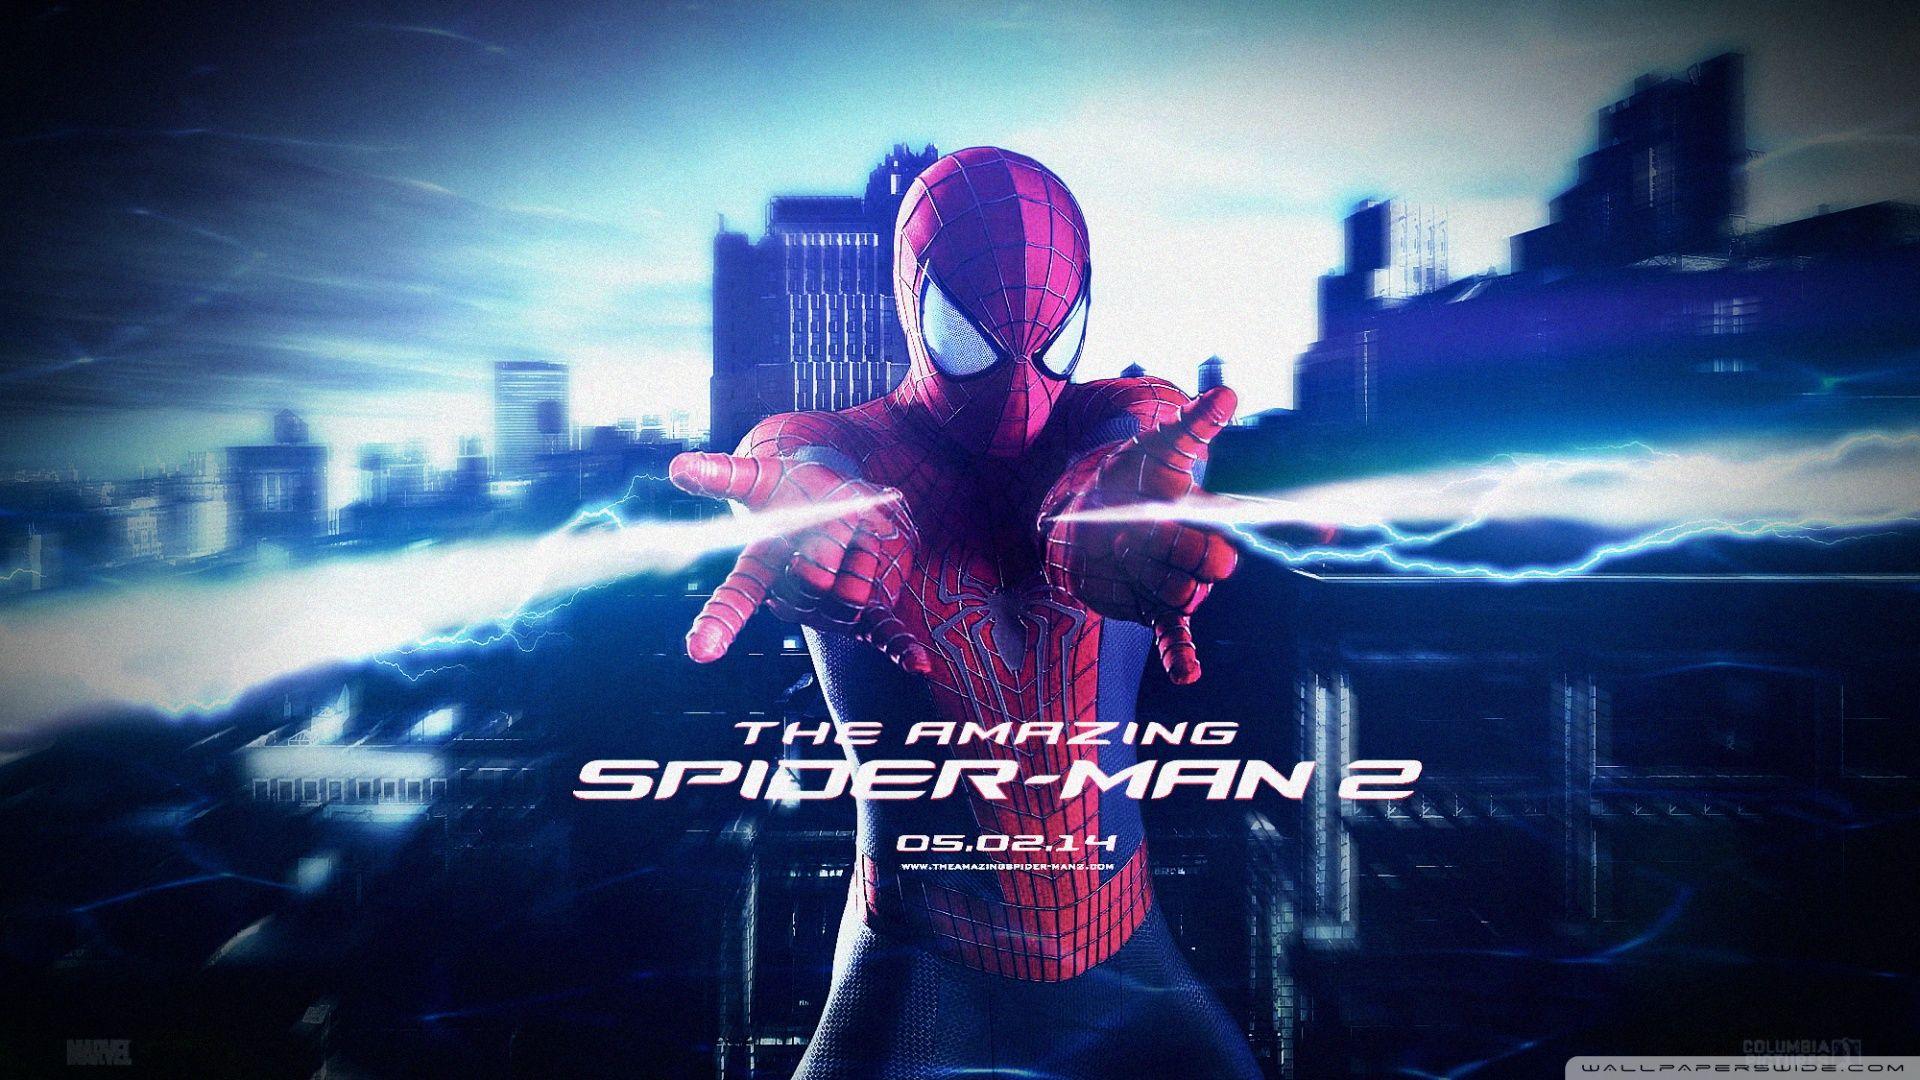 THE AMAZING SPIDERMAN 2 HD desktop wallpapers : High Definition